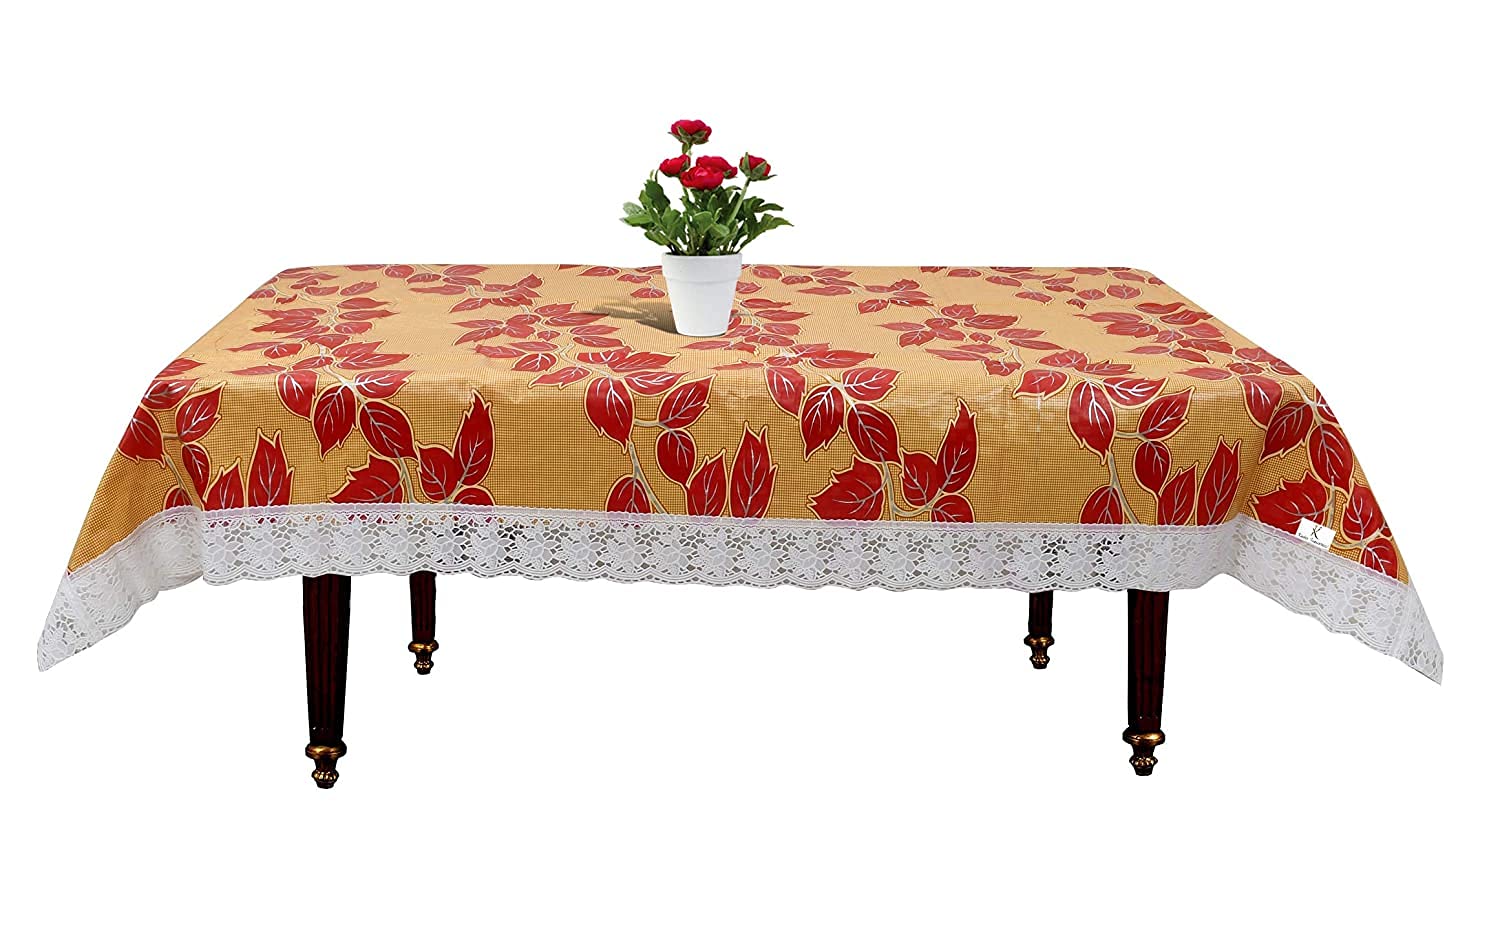 Kuber Industries Floral PVC 4 Seater Center Table Cover - Red